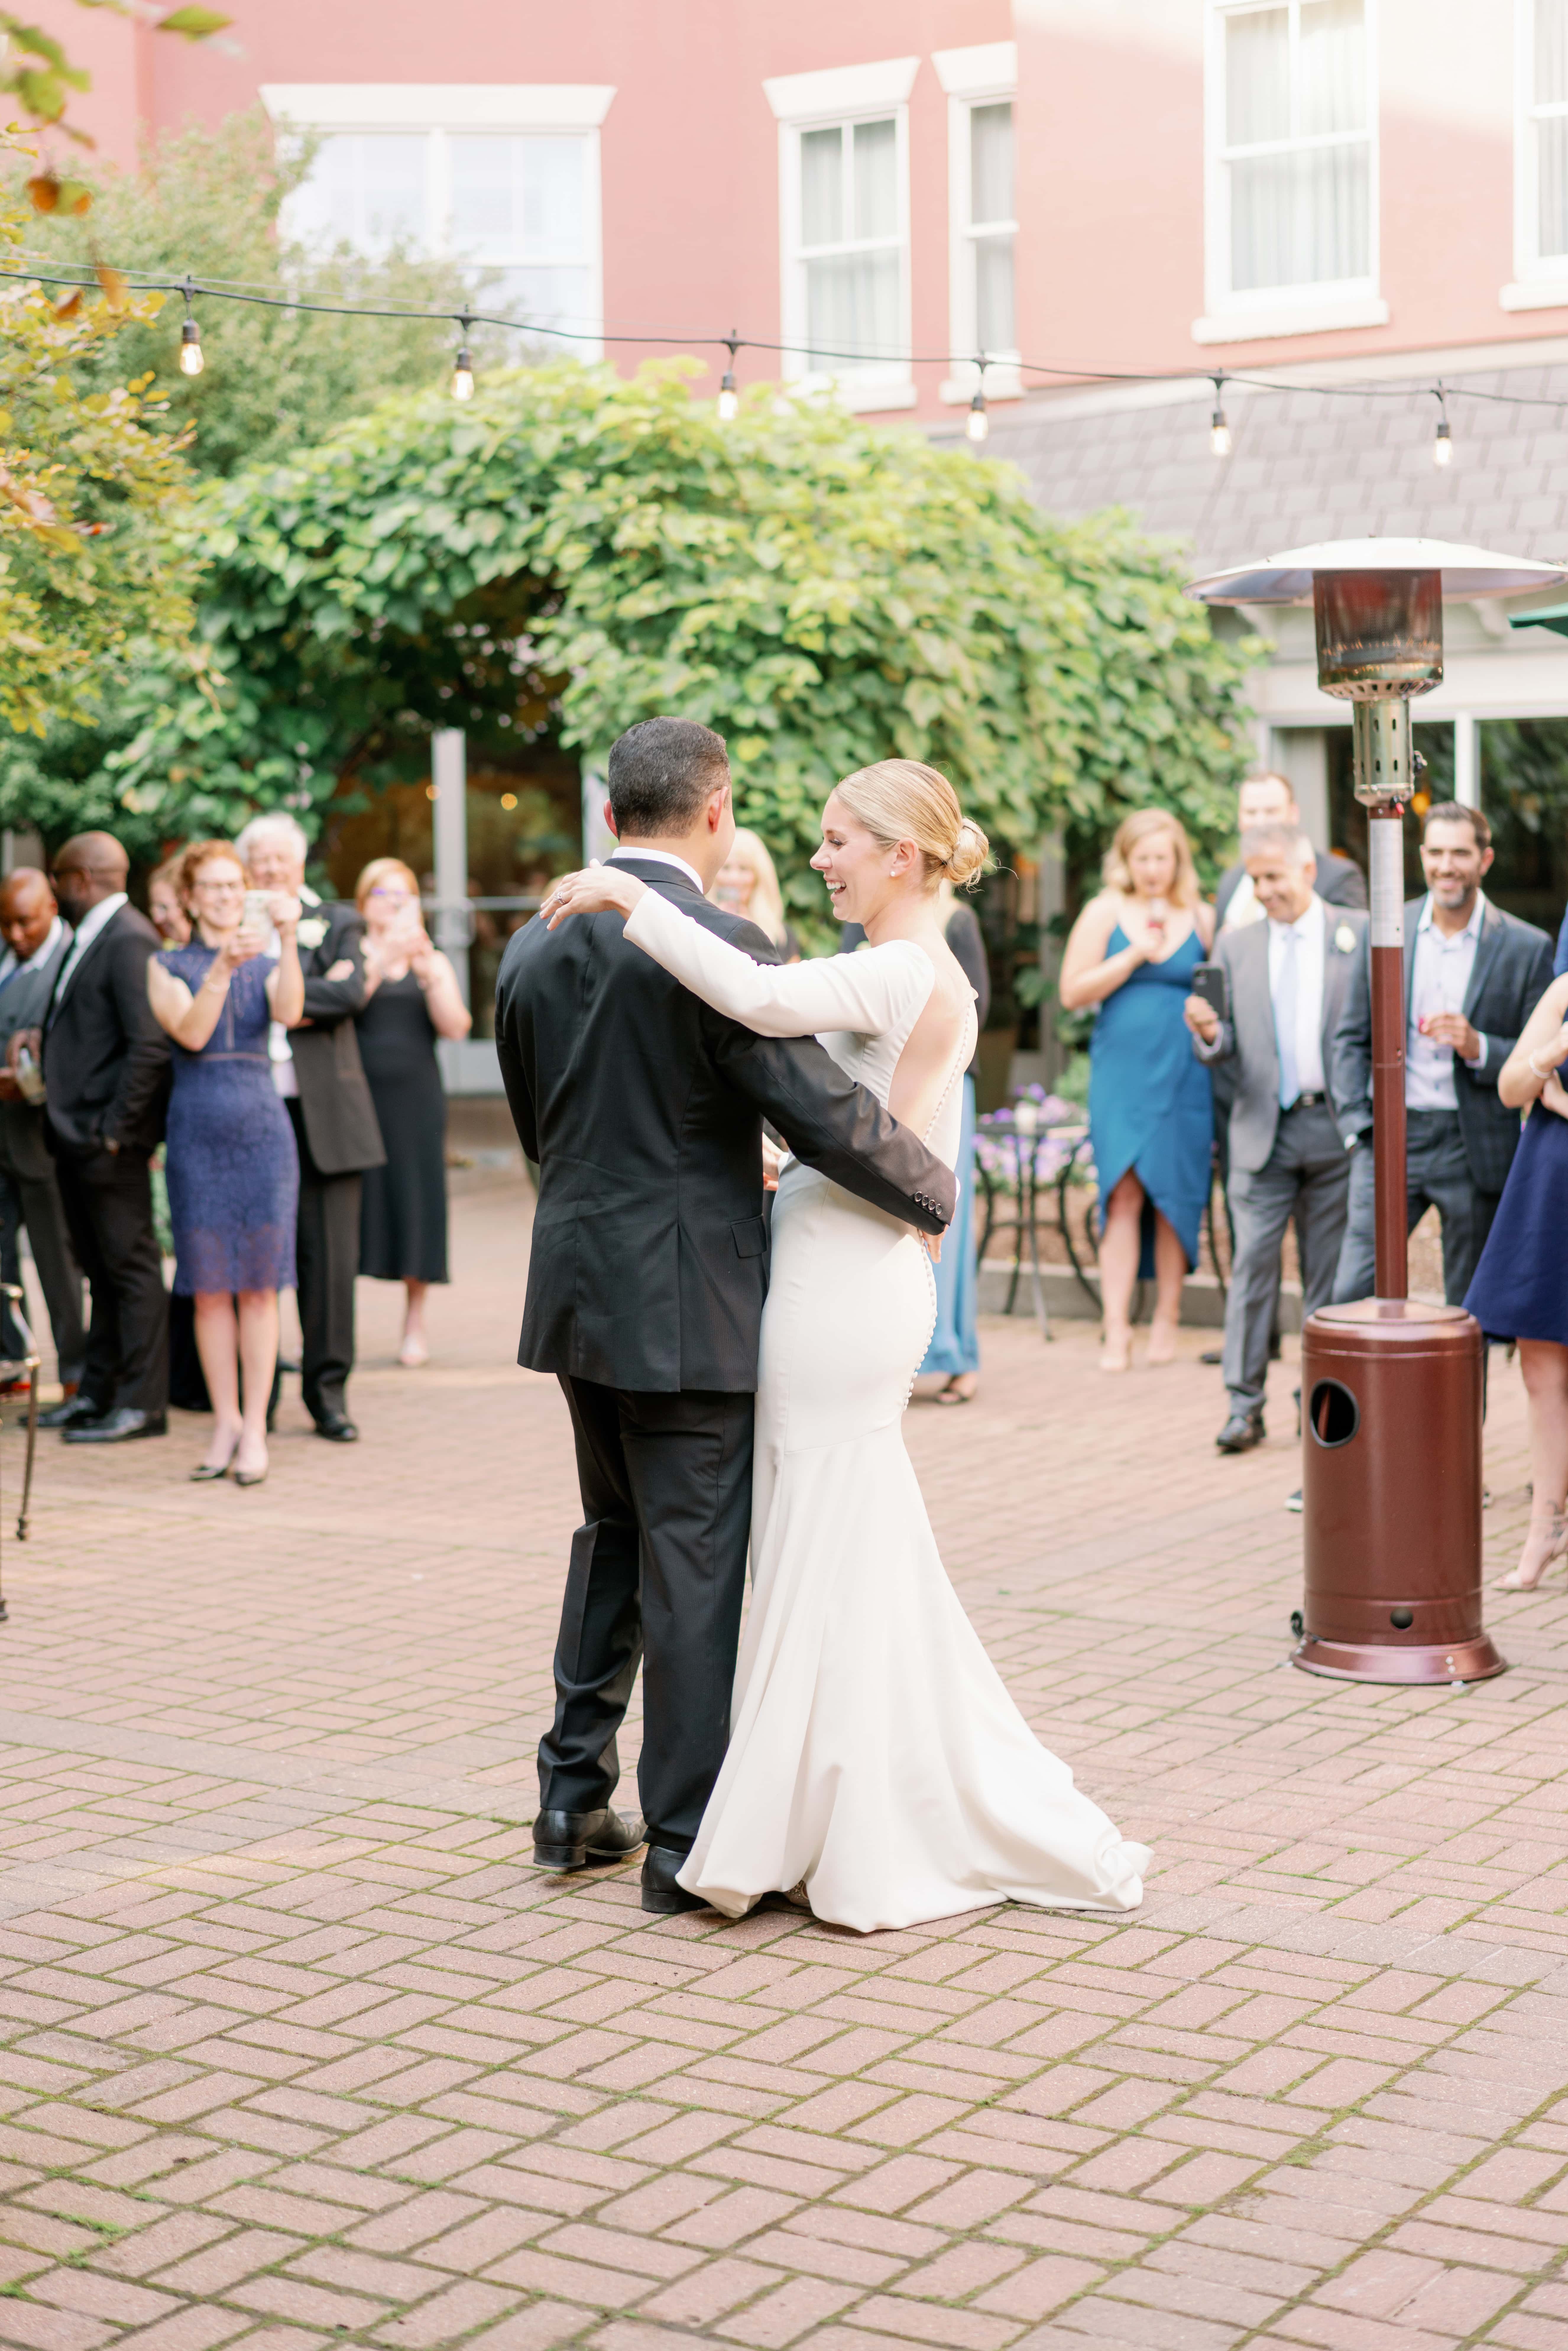 10 Dreamy Mansion Wedding Venues in New England: Couple dancing in the middle of the venue at Misselwood, with their guests looking on and filming